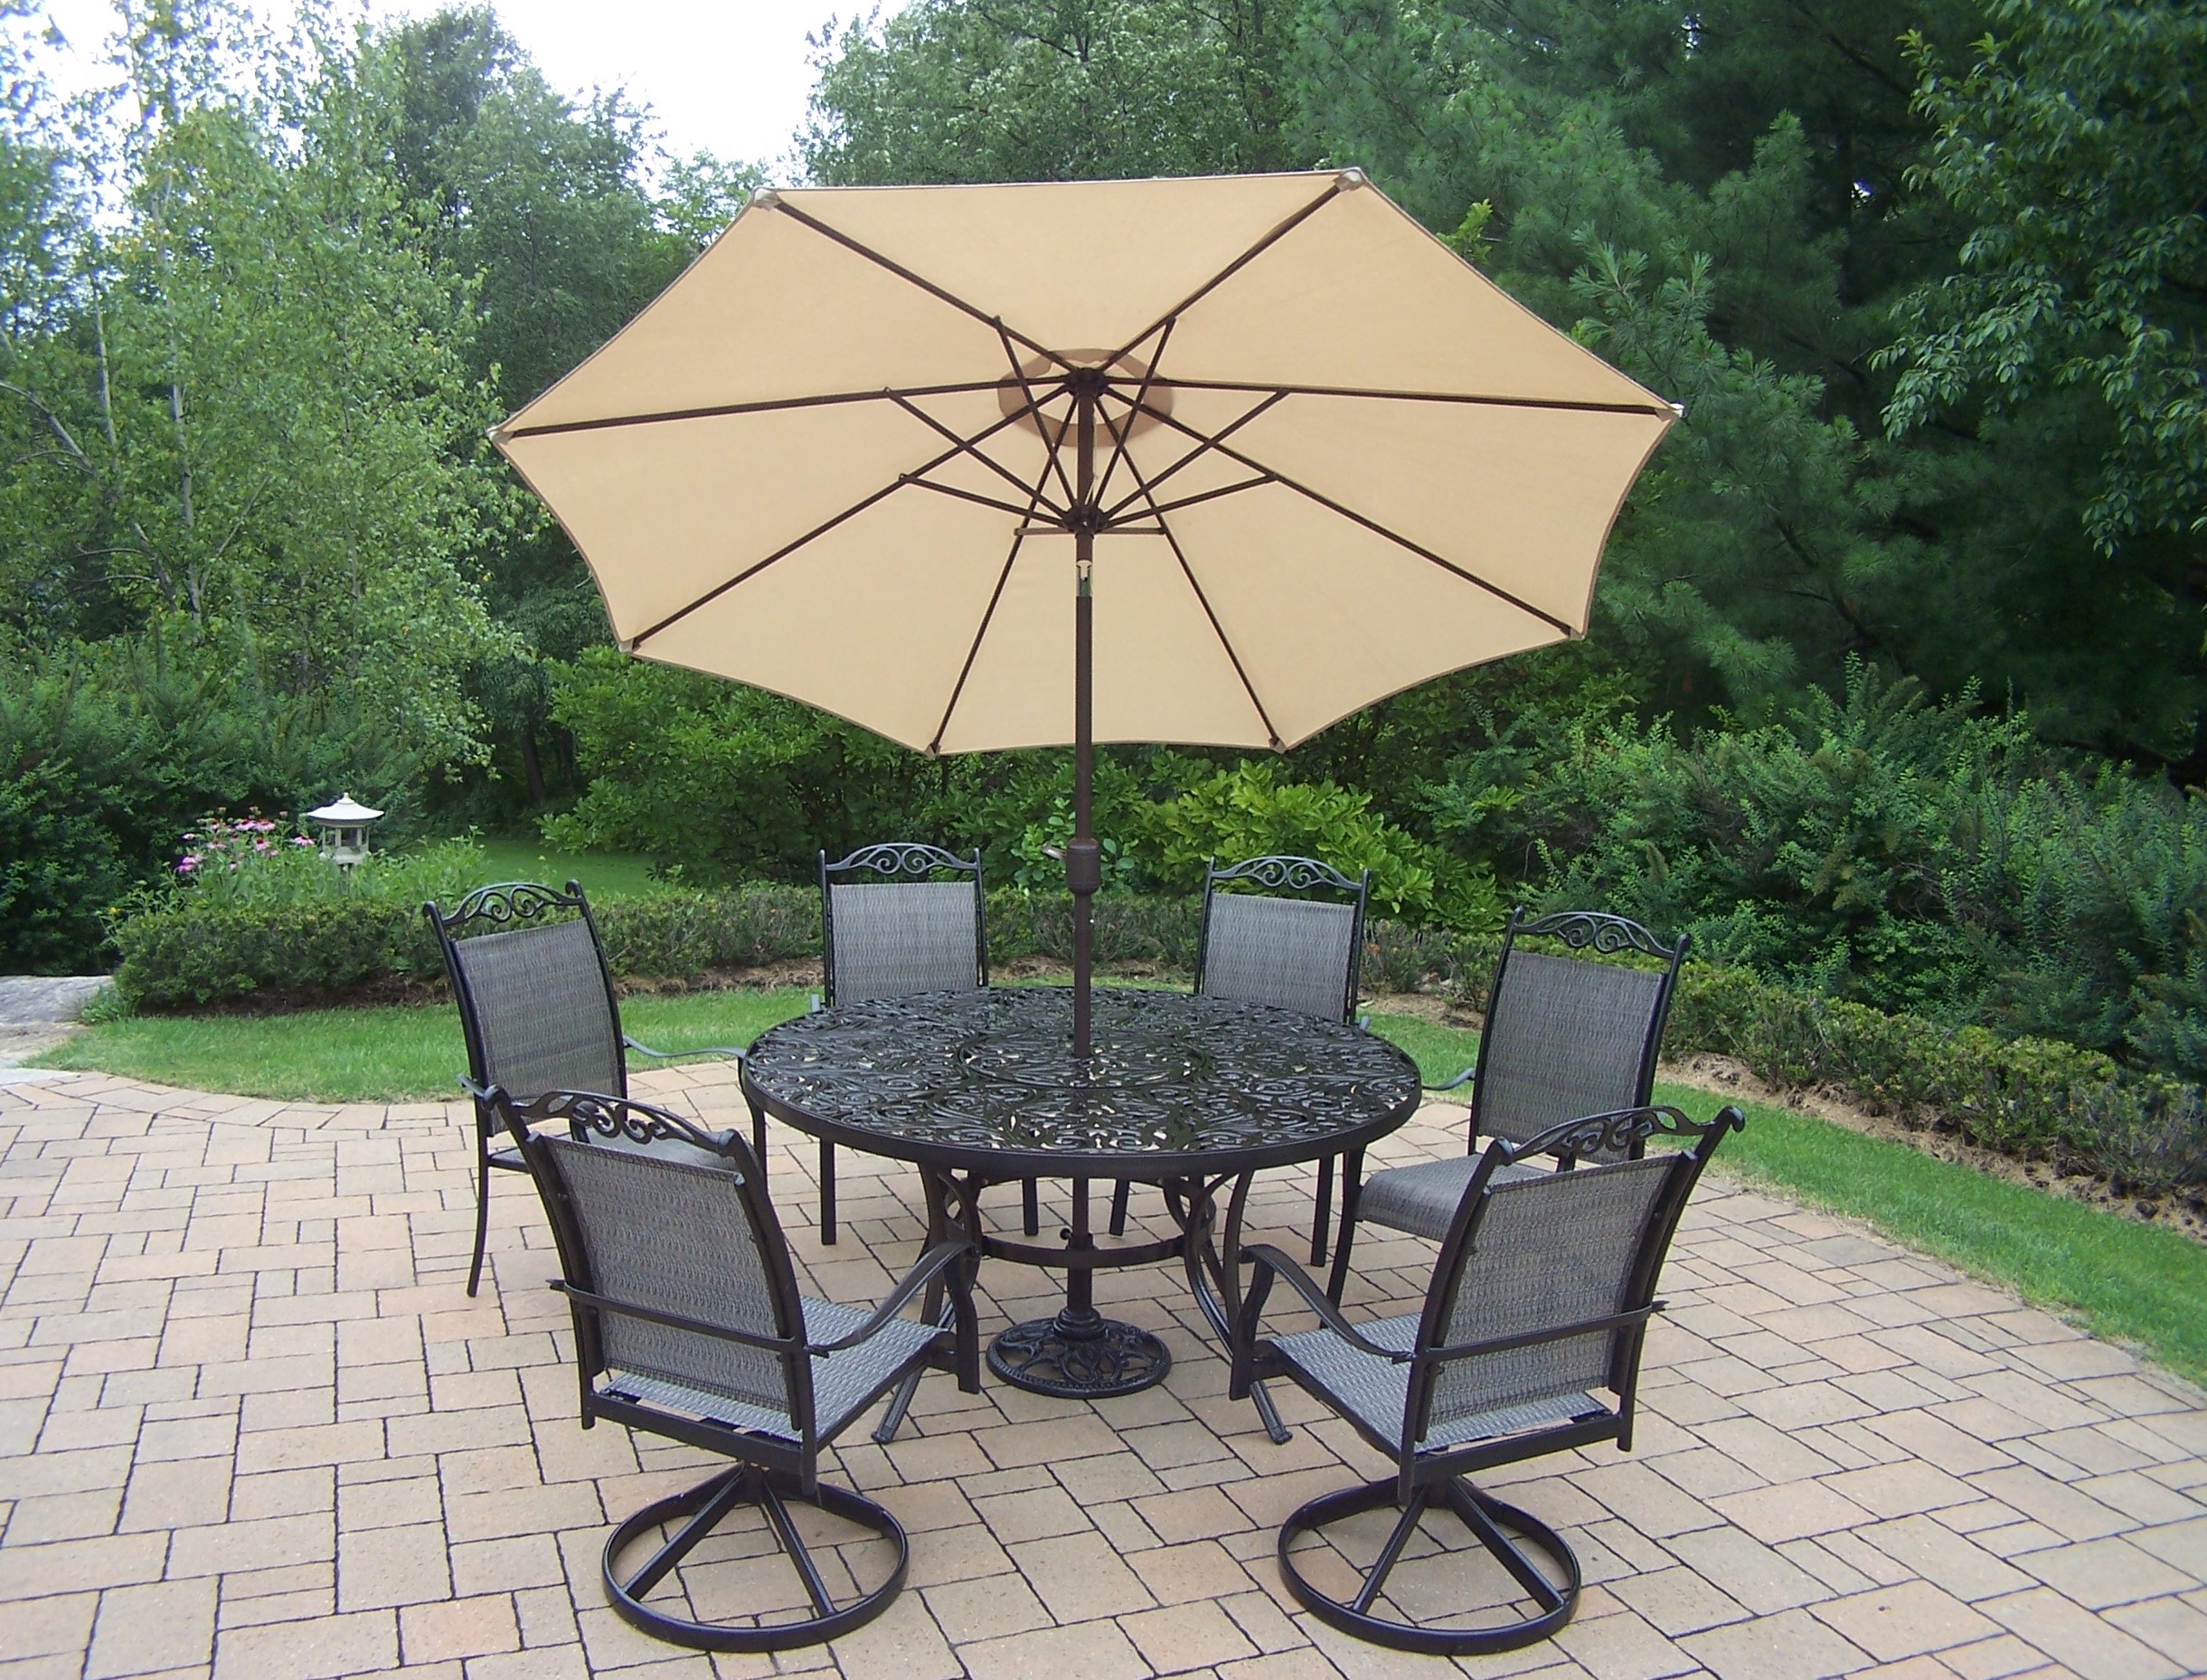 Oakland Living Aluminum Patio Dining set w/ 60" Interchangeable Round Table, Swivel Rockers, Umbrella & Stand